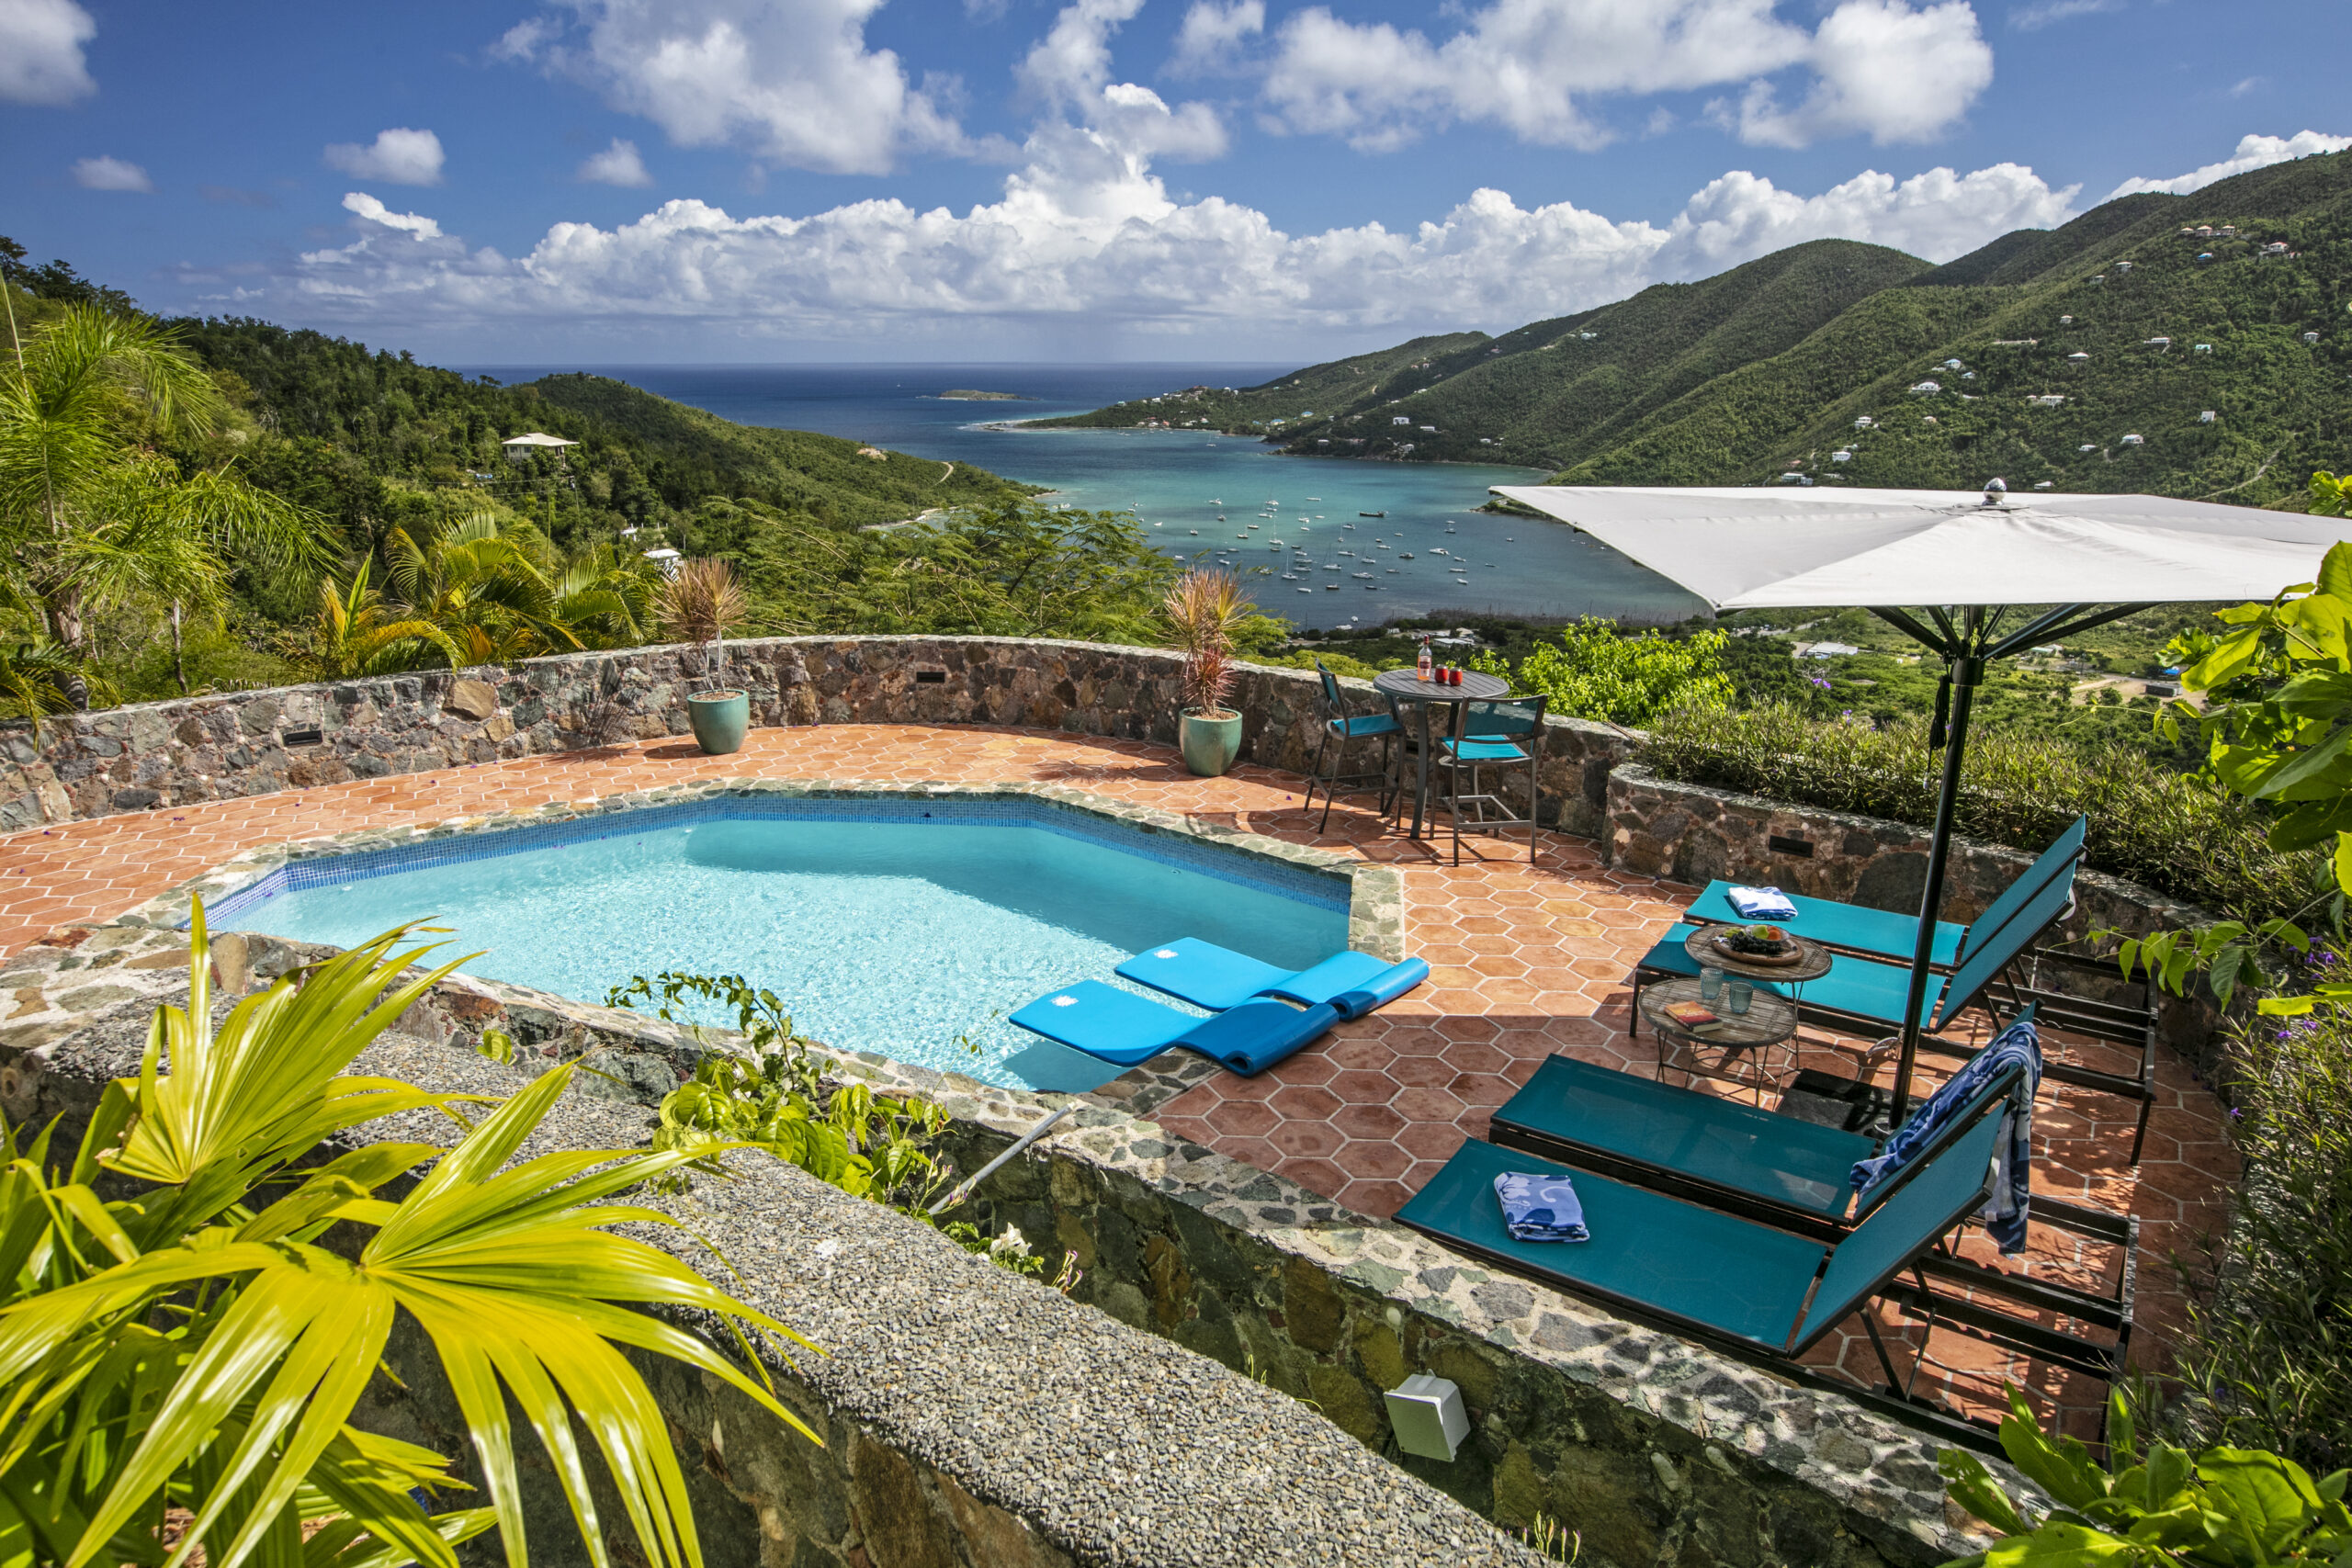 Island views from a gorgeous pool deck patio